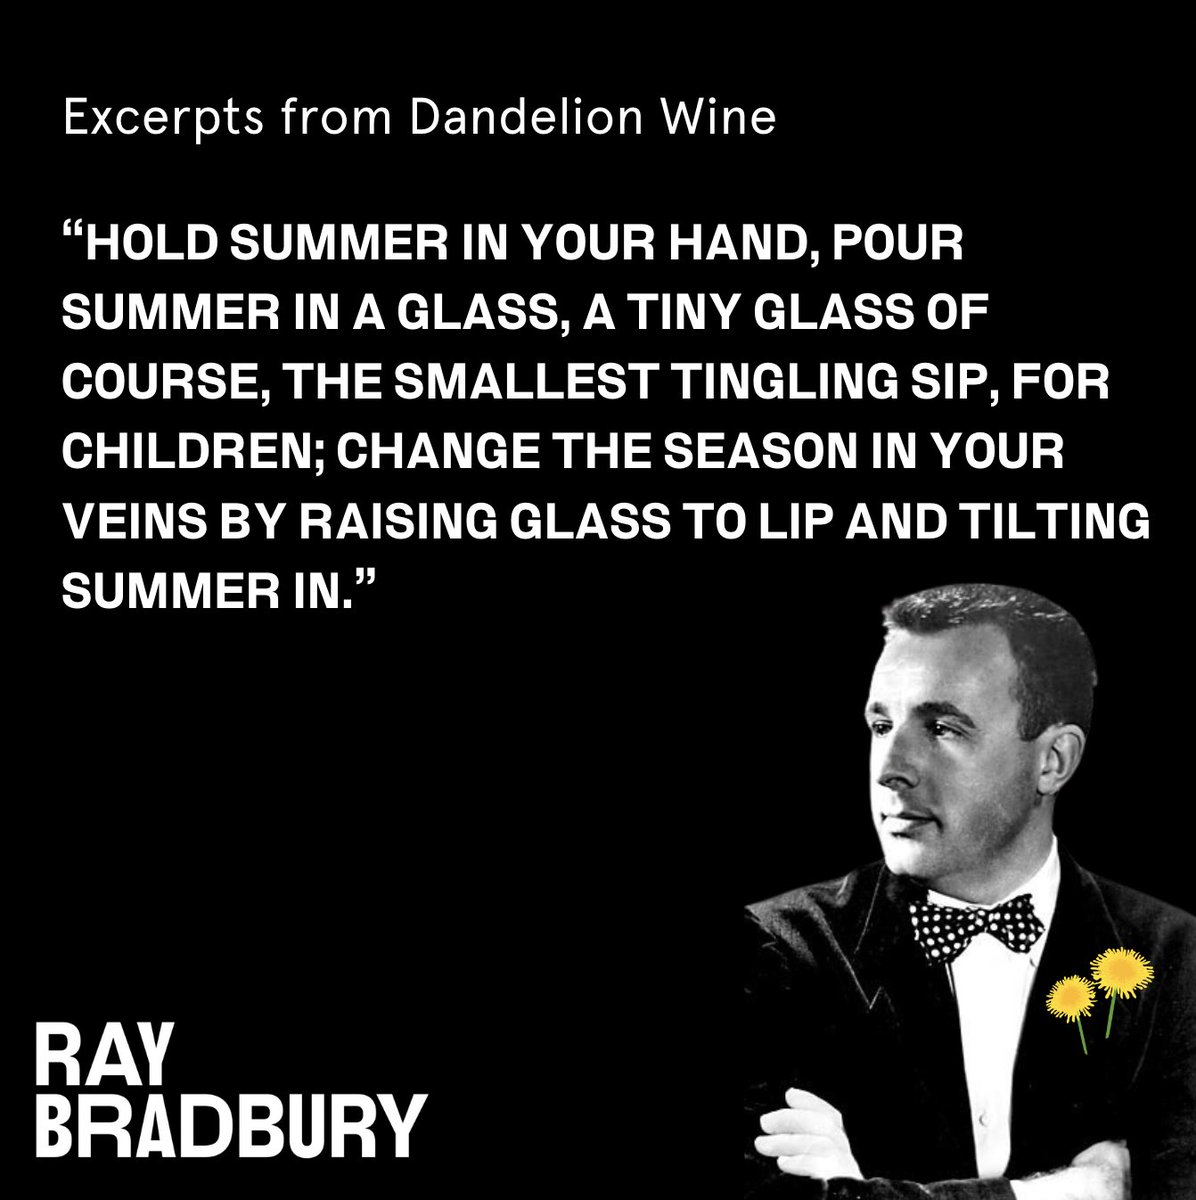 “Hold summer in your hand, pour summer in a glass, a tiny glass of course, the smallest tingling sip, for children; change the season in your veins by raising glass to lip and tilting summer in.” -Ray Bradbury, Dandelion Wine . . . #ExcerptsFromDandelionWine #RayBradbury #Read